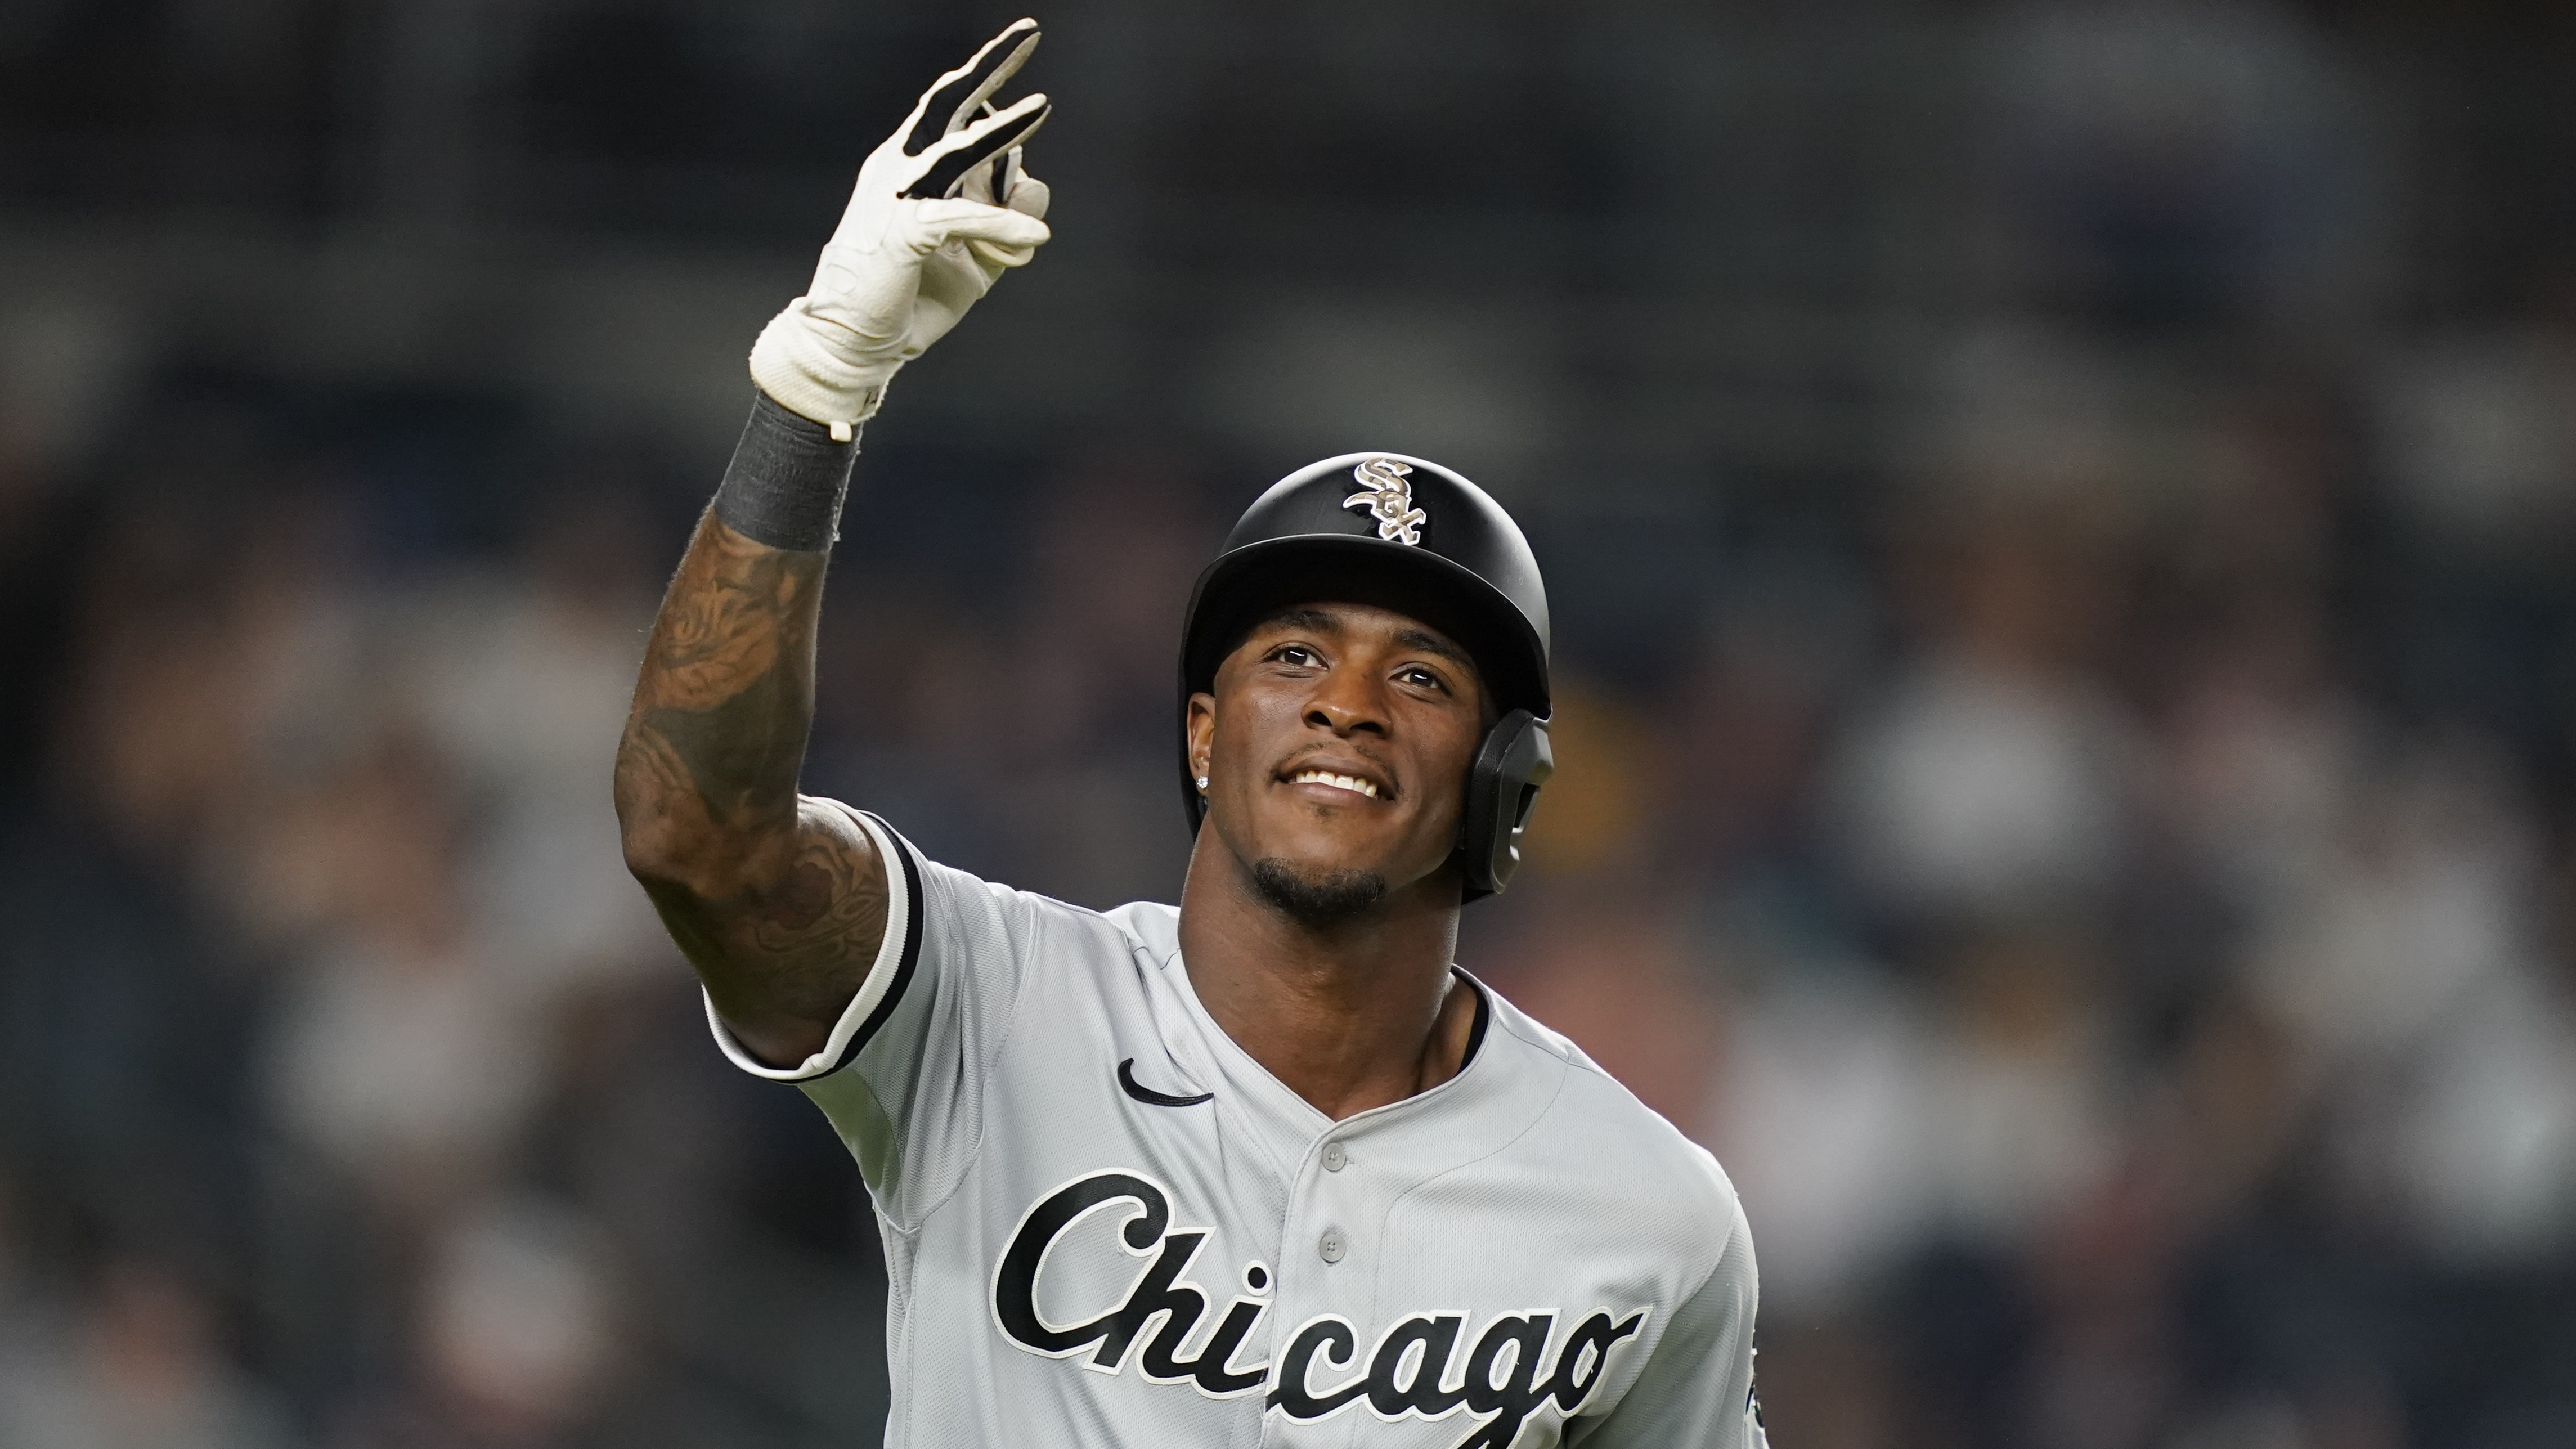 White Sox manager says Yankees' Josh Donaldson called Tim Anderson